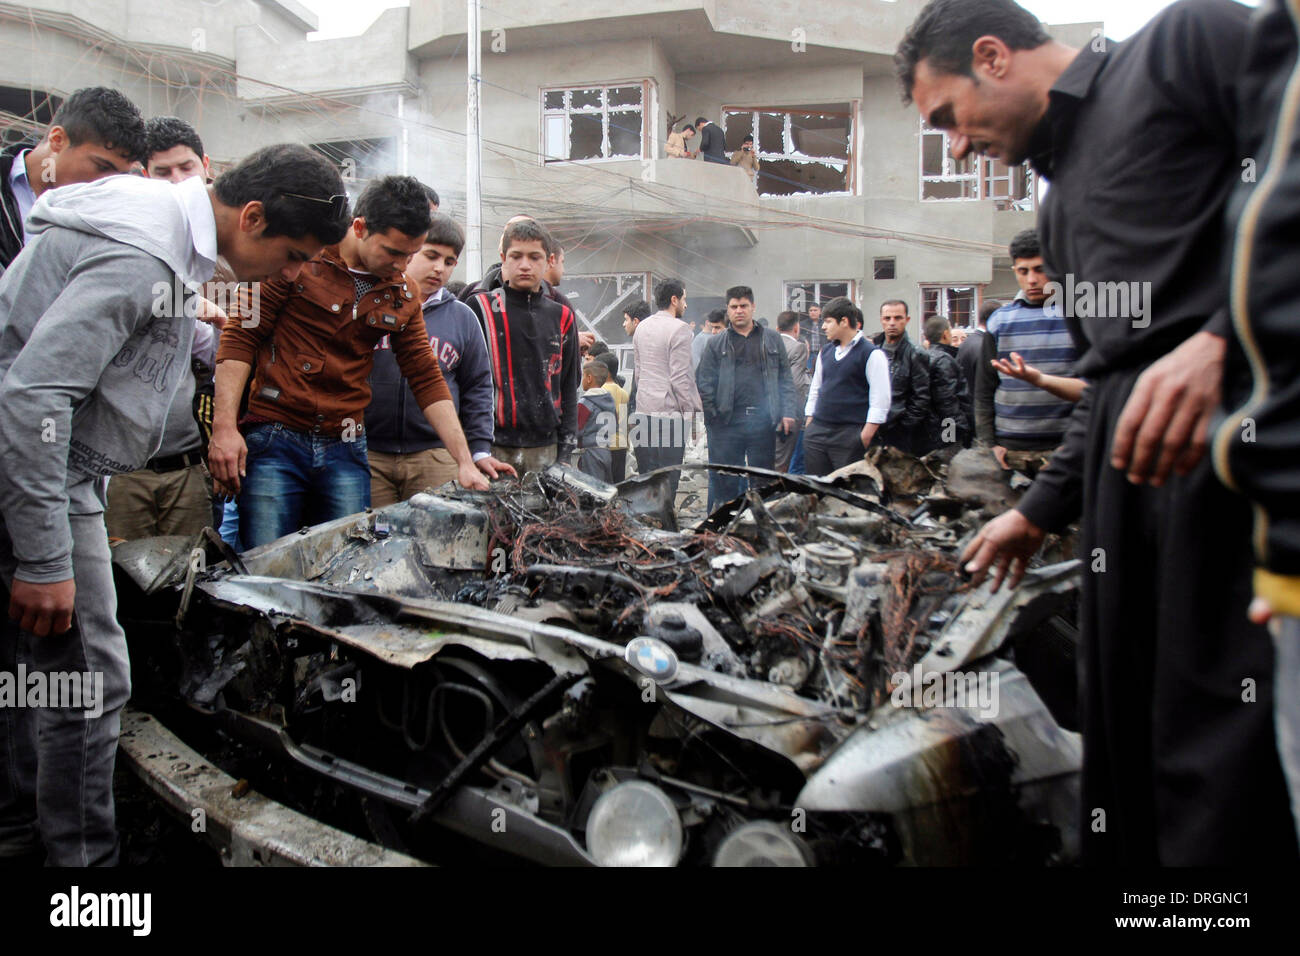 Kirkuk, Iraq. 26th Jan, 2014. People gather around a damaged vehicle at the blast site in Kirkuk, Iraq, on Jan. 26, 2014. At least four people were killed and 14 wounded in the afternoon when three car bombs detonated almost simultaneously in separate neighborhoods in the city of Kirkuk, some 250 km north of the Iraqi capital of Baghdad, a local police source told Xinhua on condition of anonymity. Credit:  Dena Assad/Xinhua/Alamy Live News Stock Photo